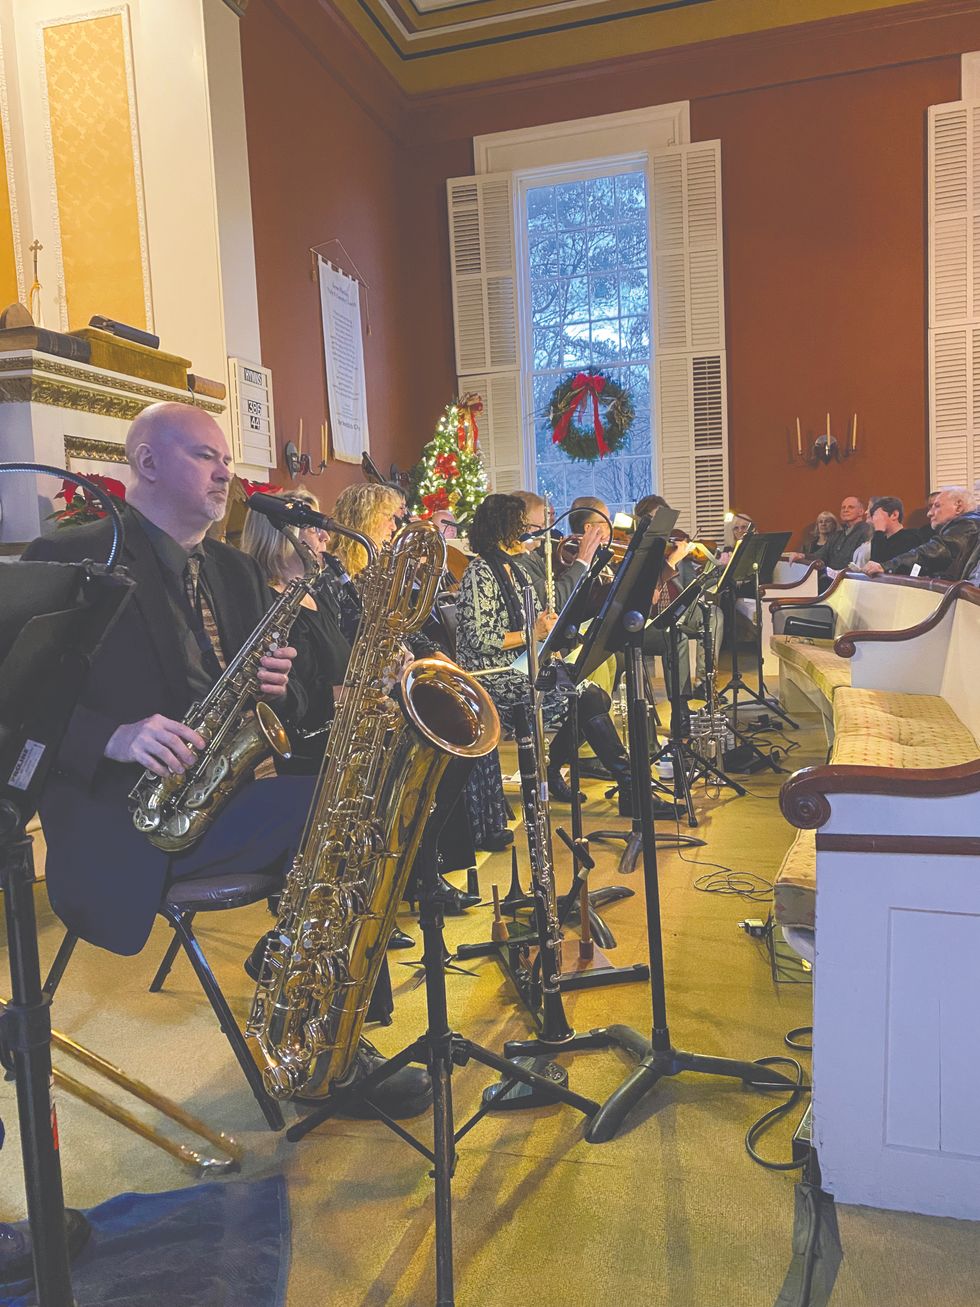 Christmas Concert delights at Smithfield Church